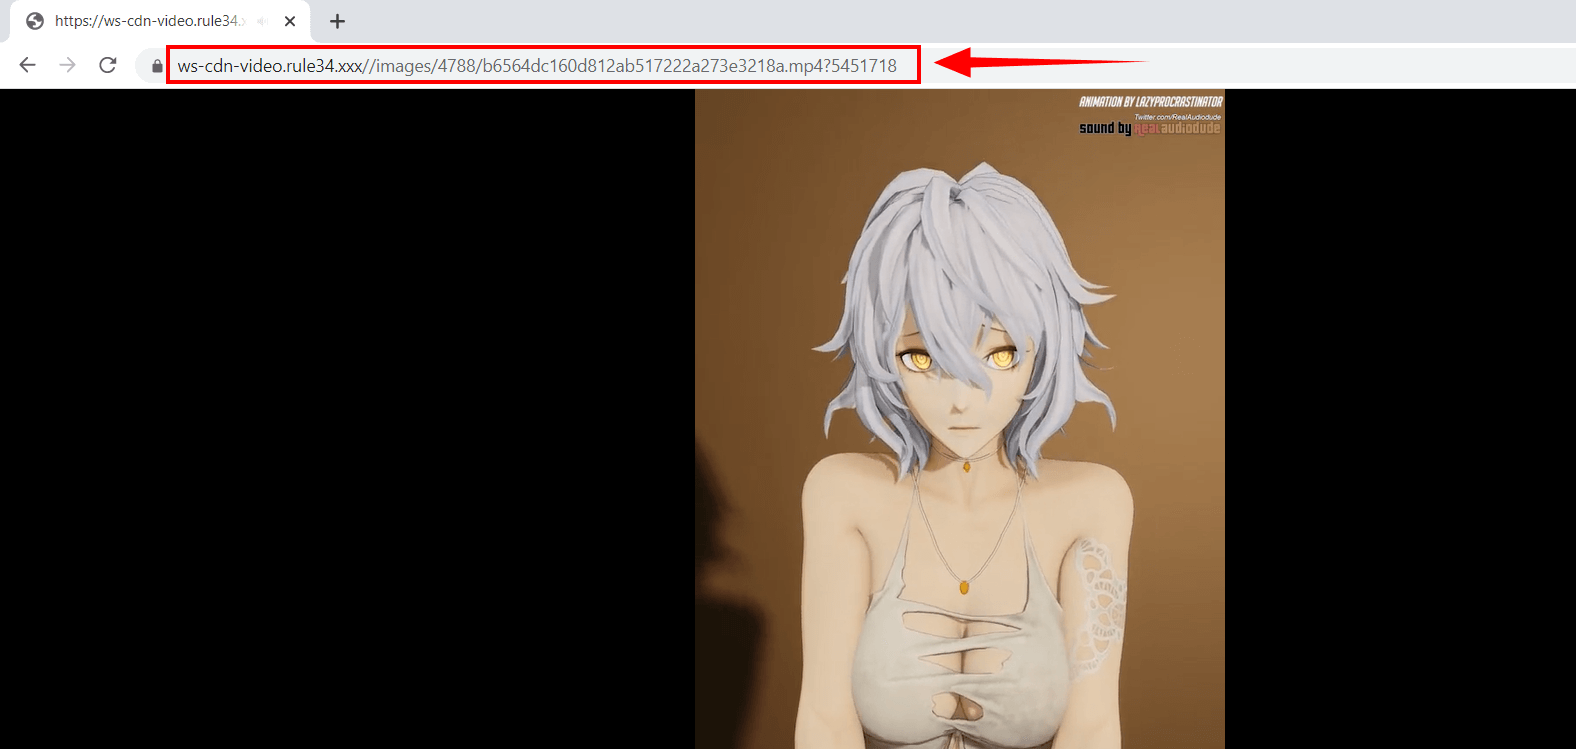 download videos from rule34, copy the url